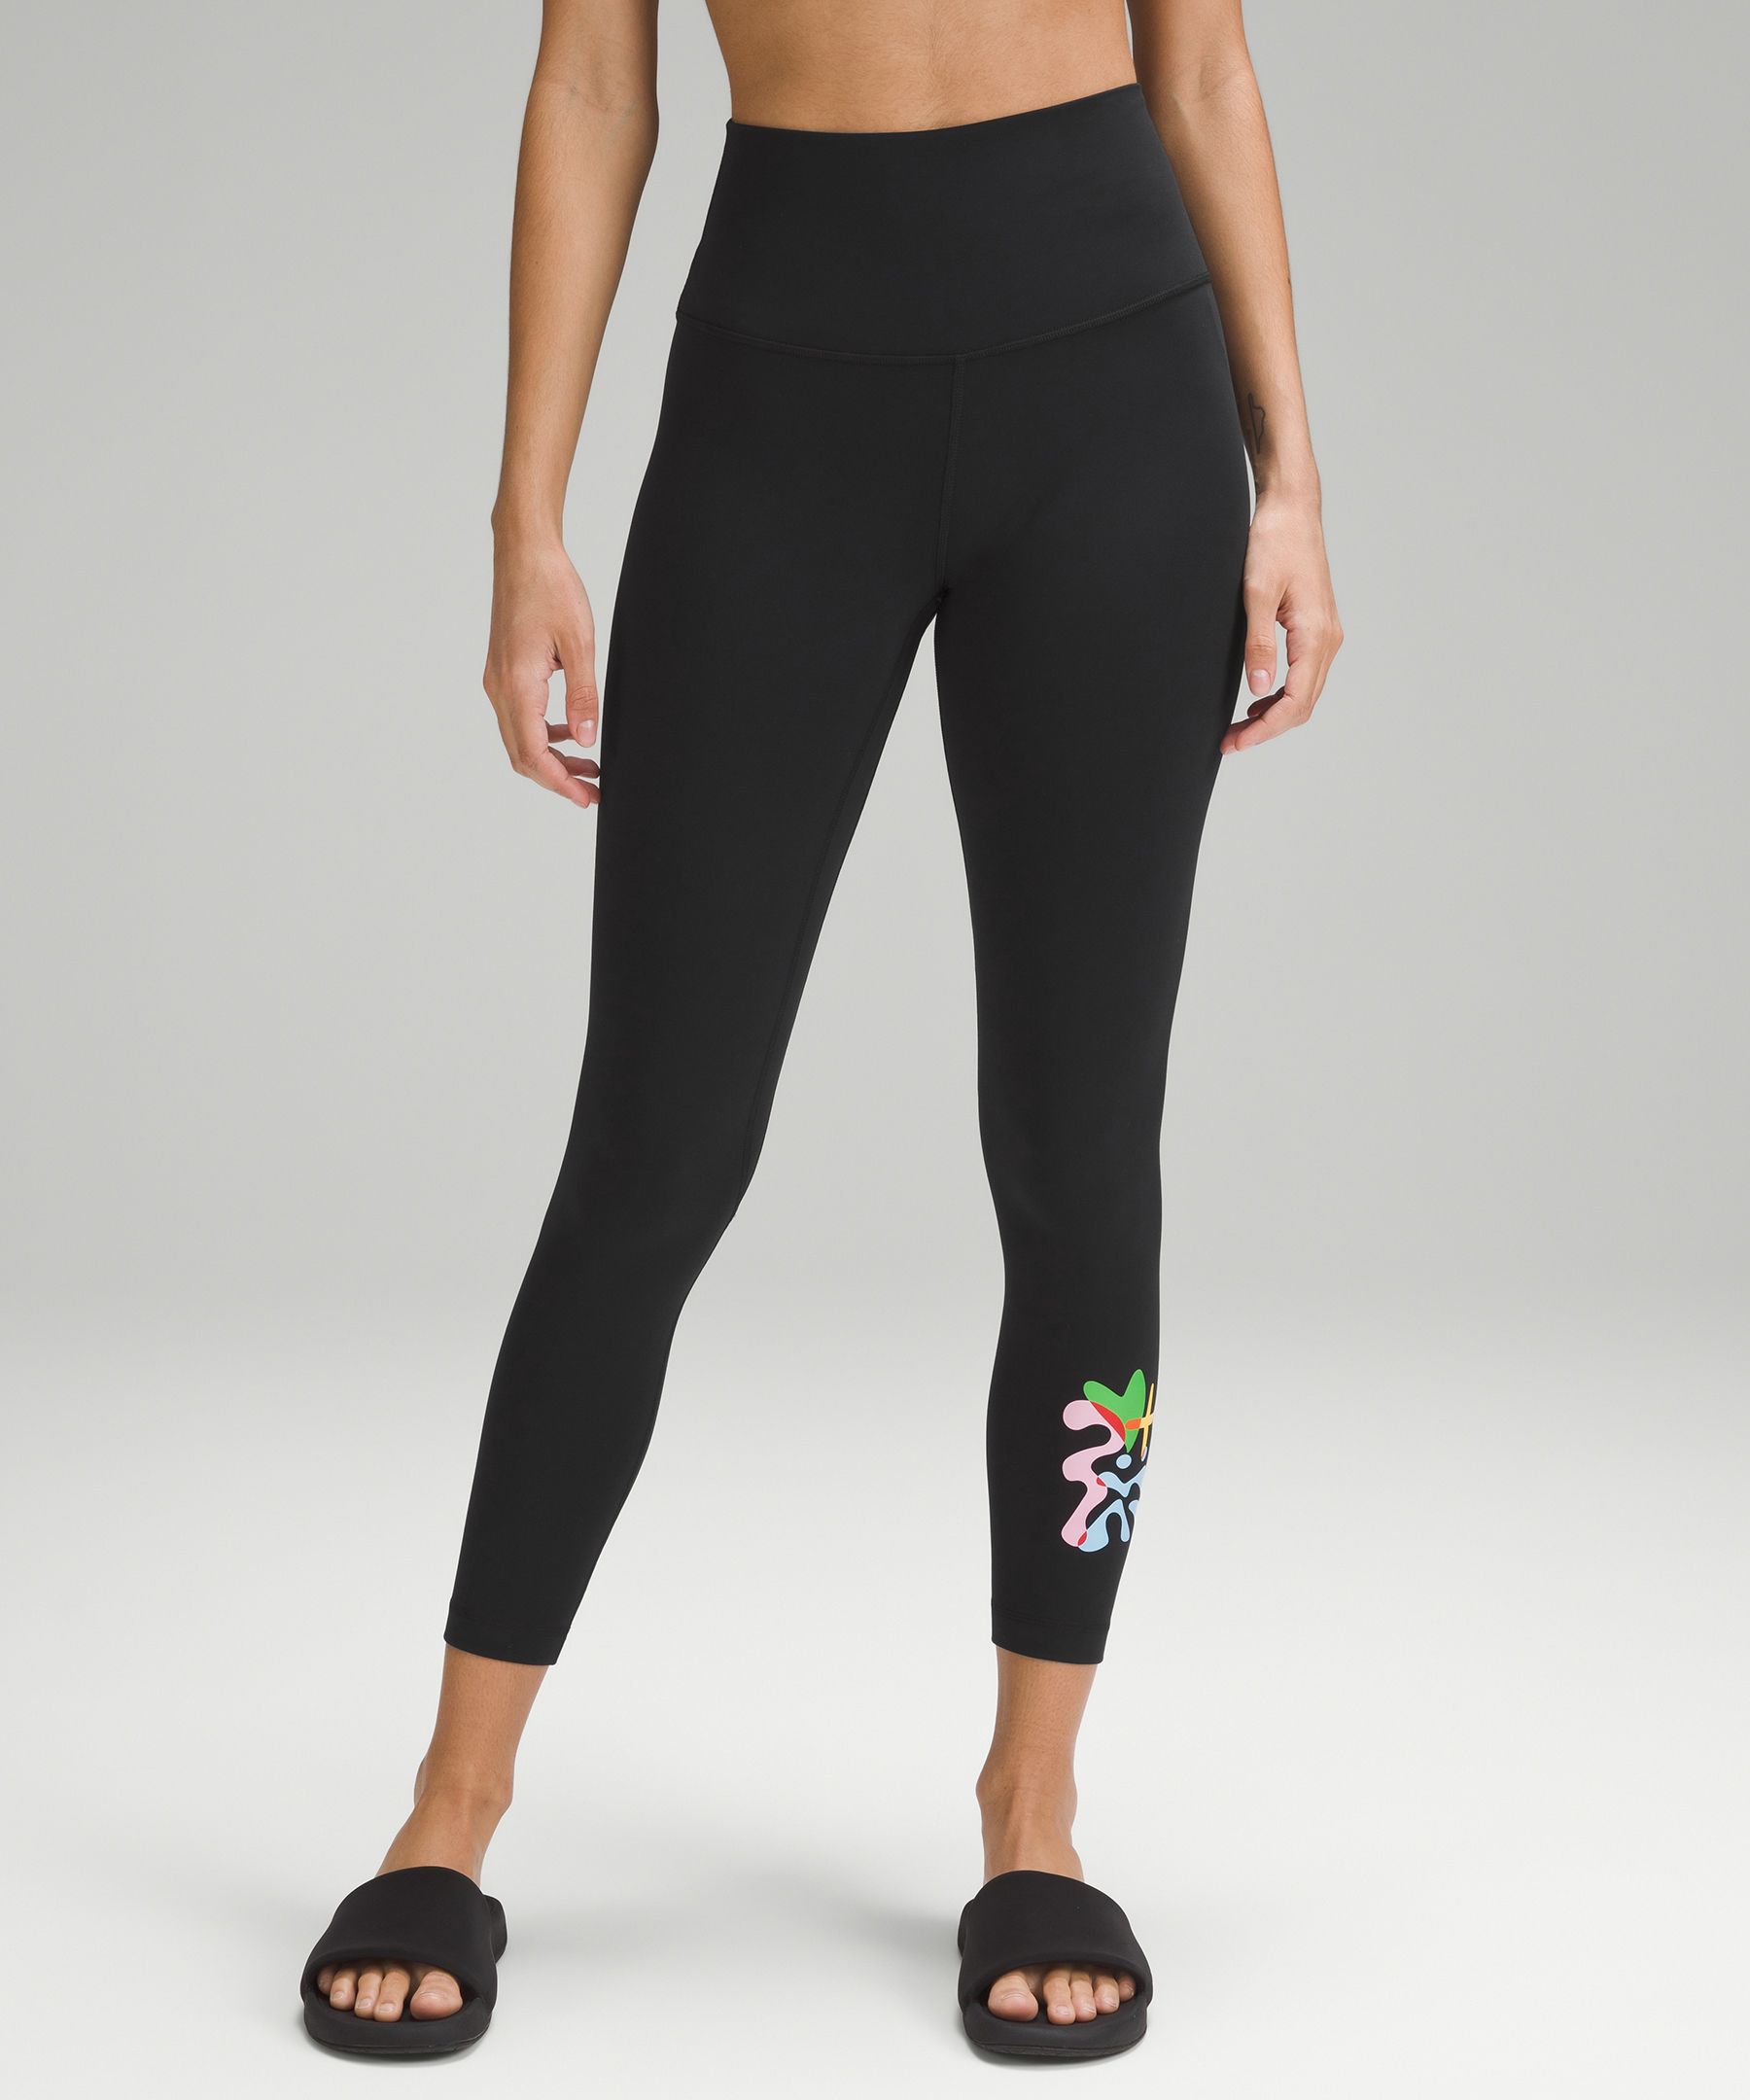 lululemon - As if we needed another reason to love the Align Pant